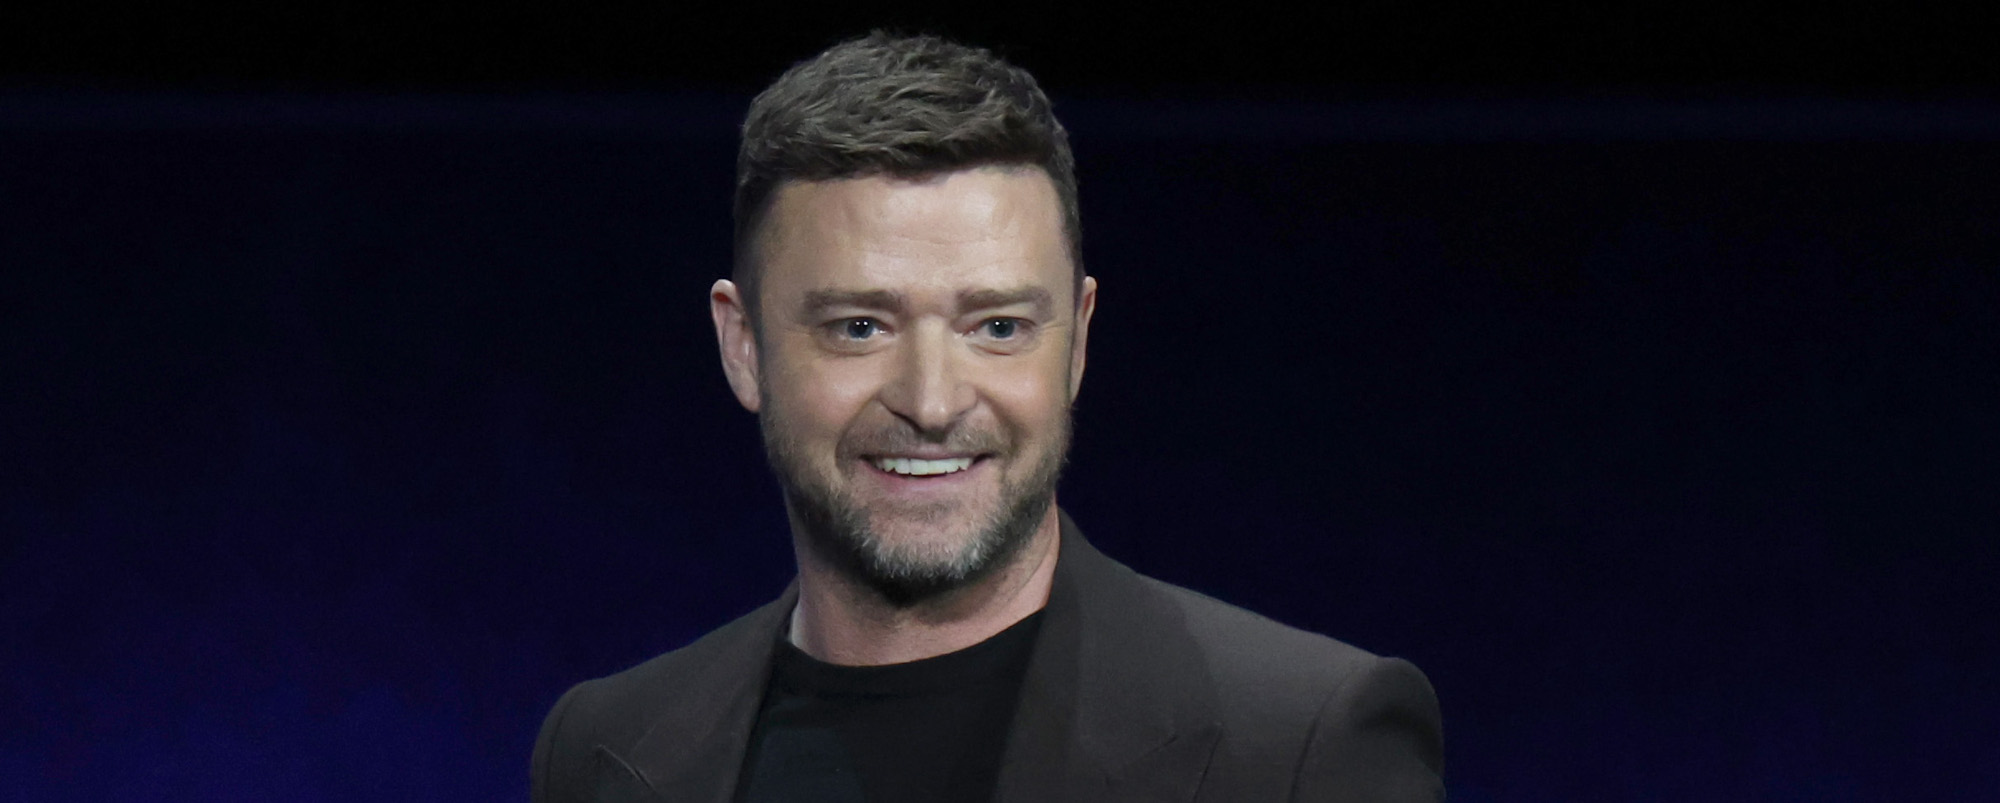 As Justin Timberlake Gets Set to Host ‘SNL’ Let’s Look Back on His Most Iconic Visits